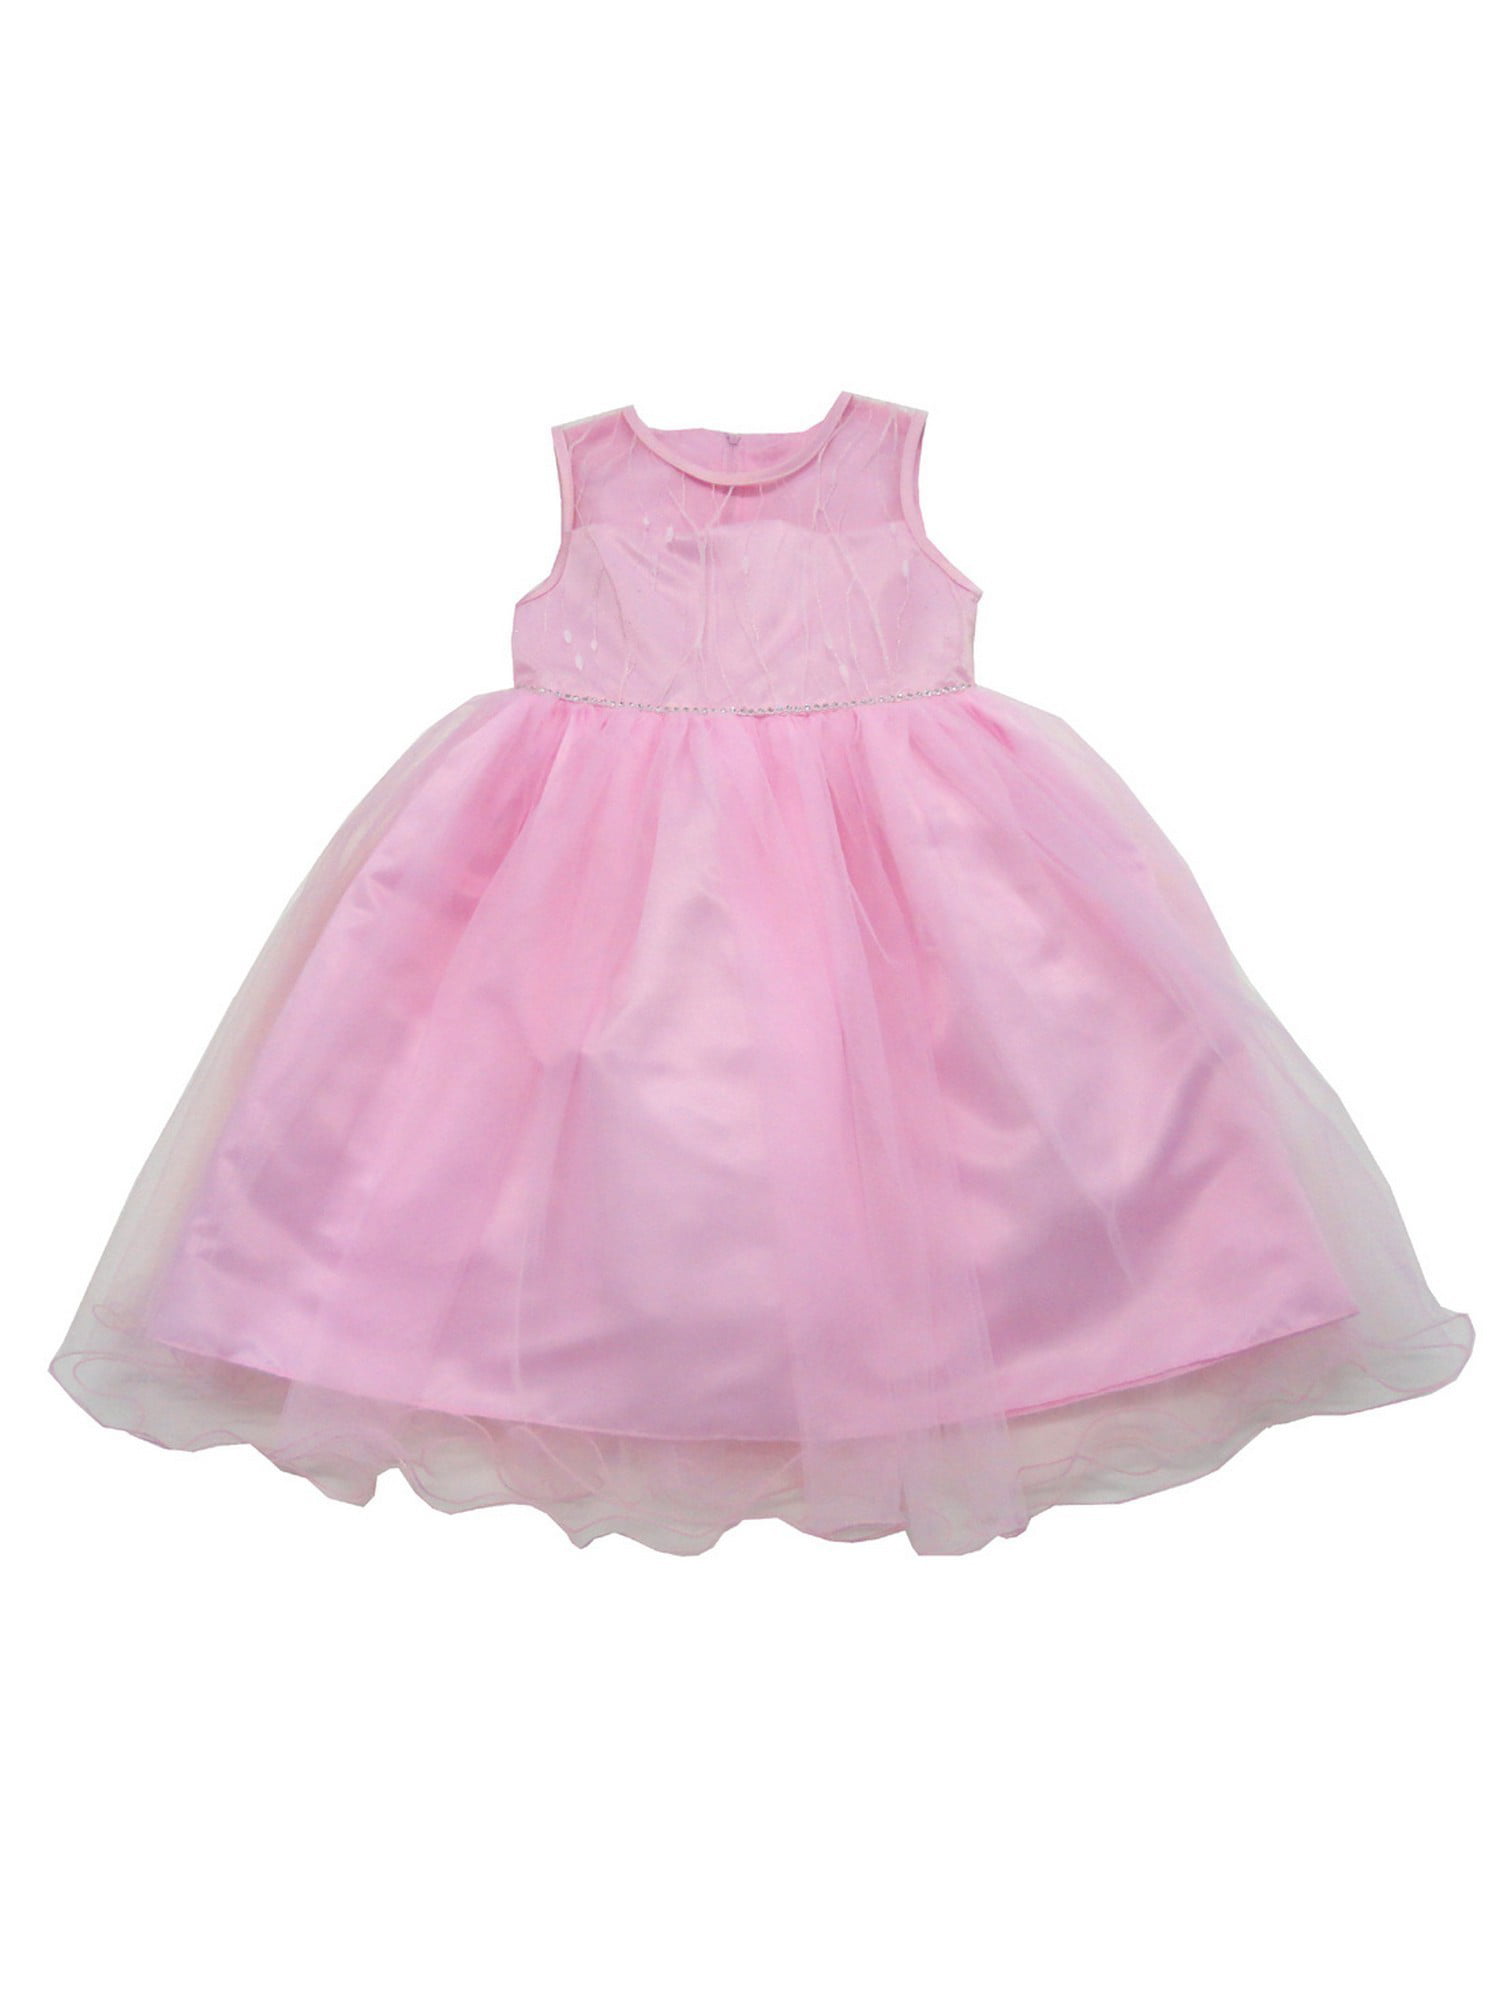 S. Square - Little Girls Pink Embroidered Tulle Glitter Trim Stylish ...